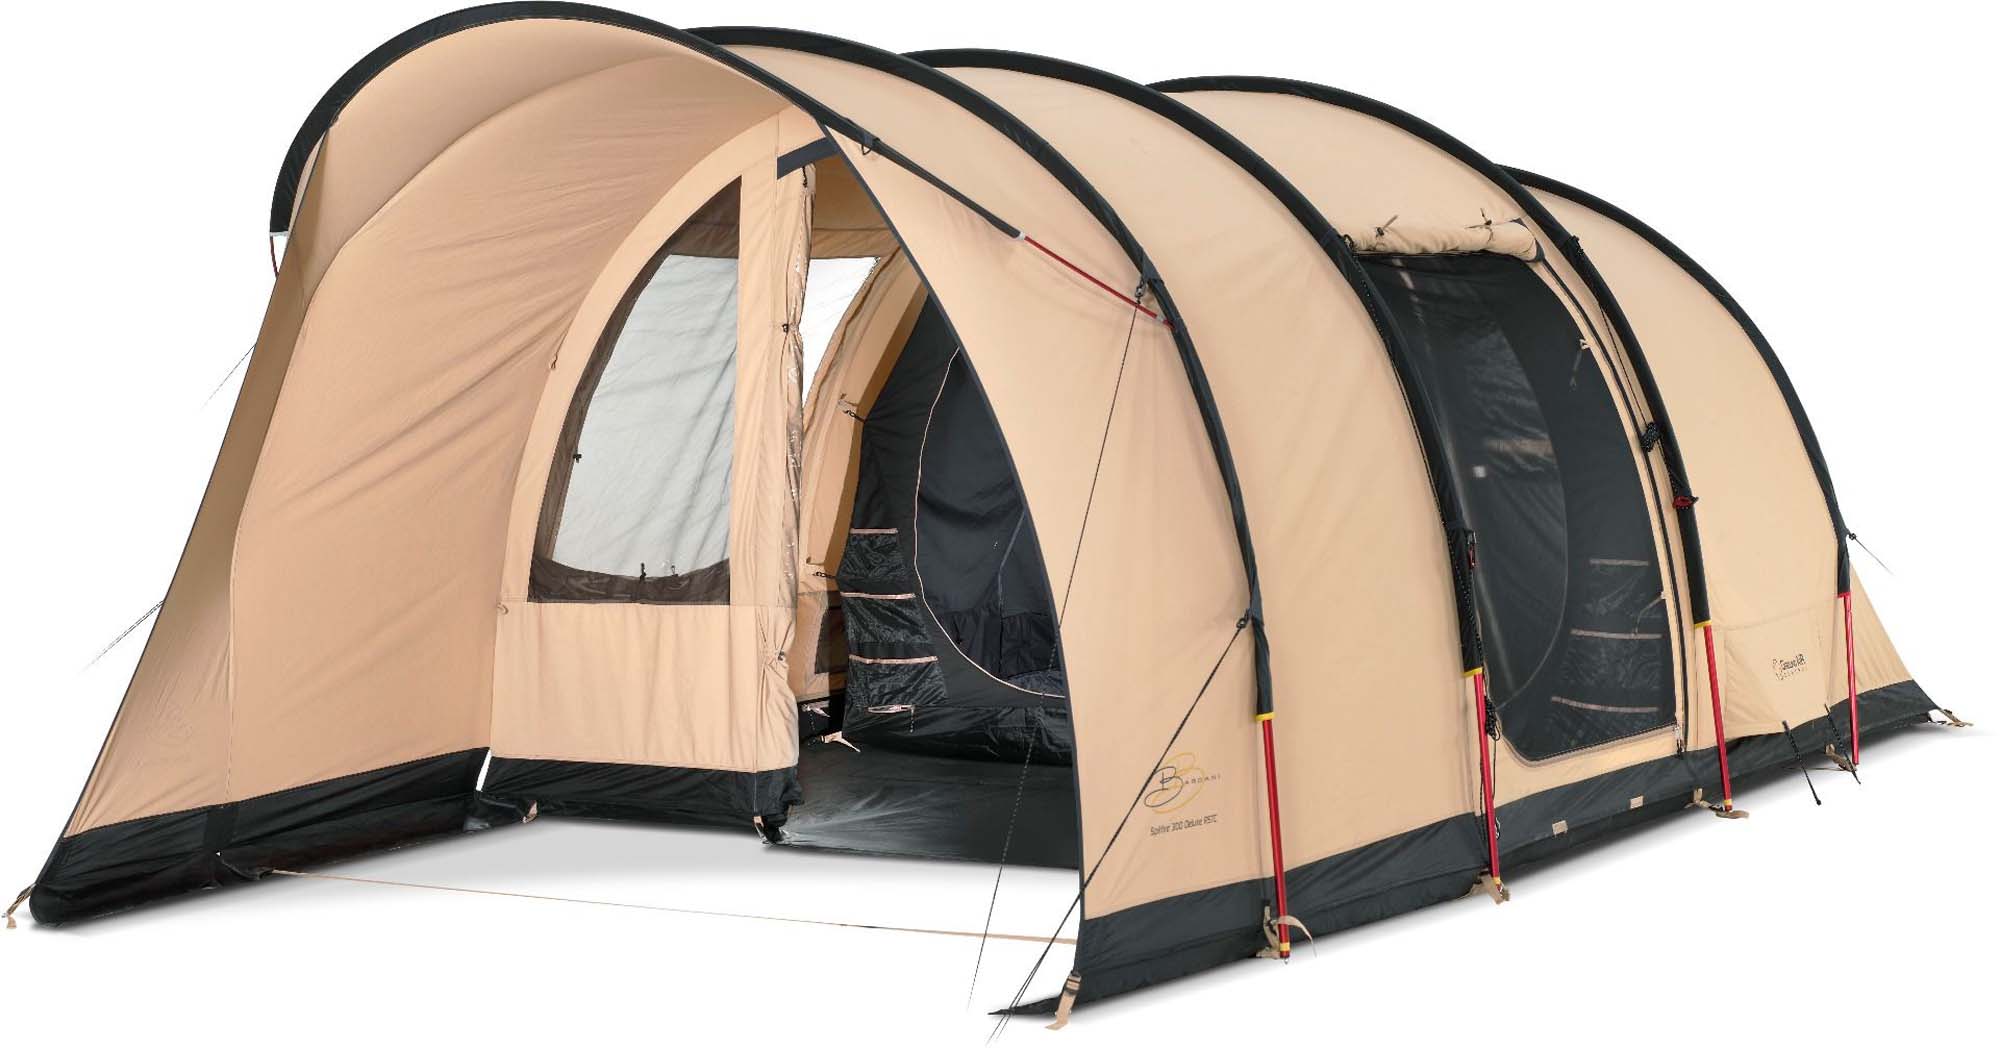 BARDANI Spitfire 300 Deluxe RSTC Tunneltent